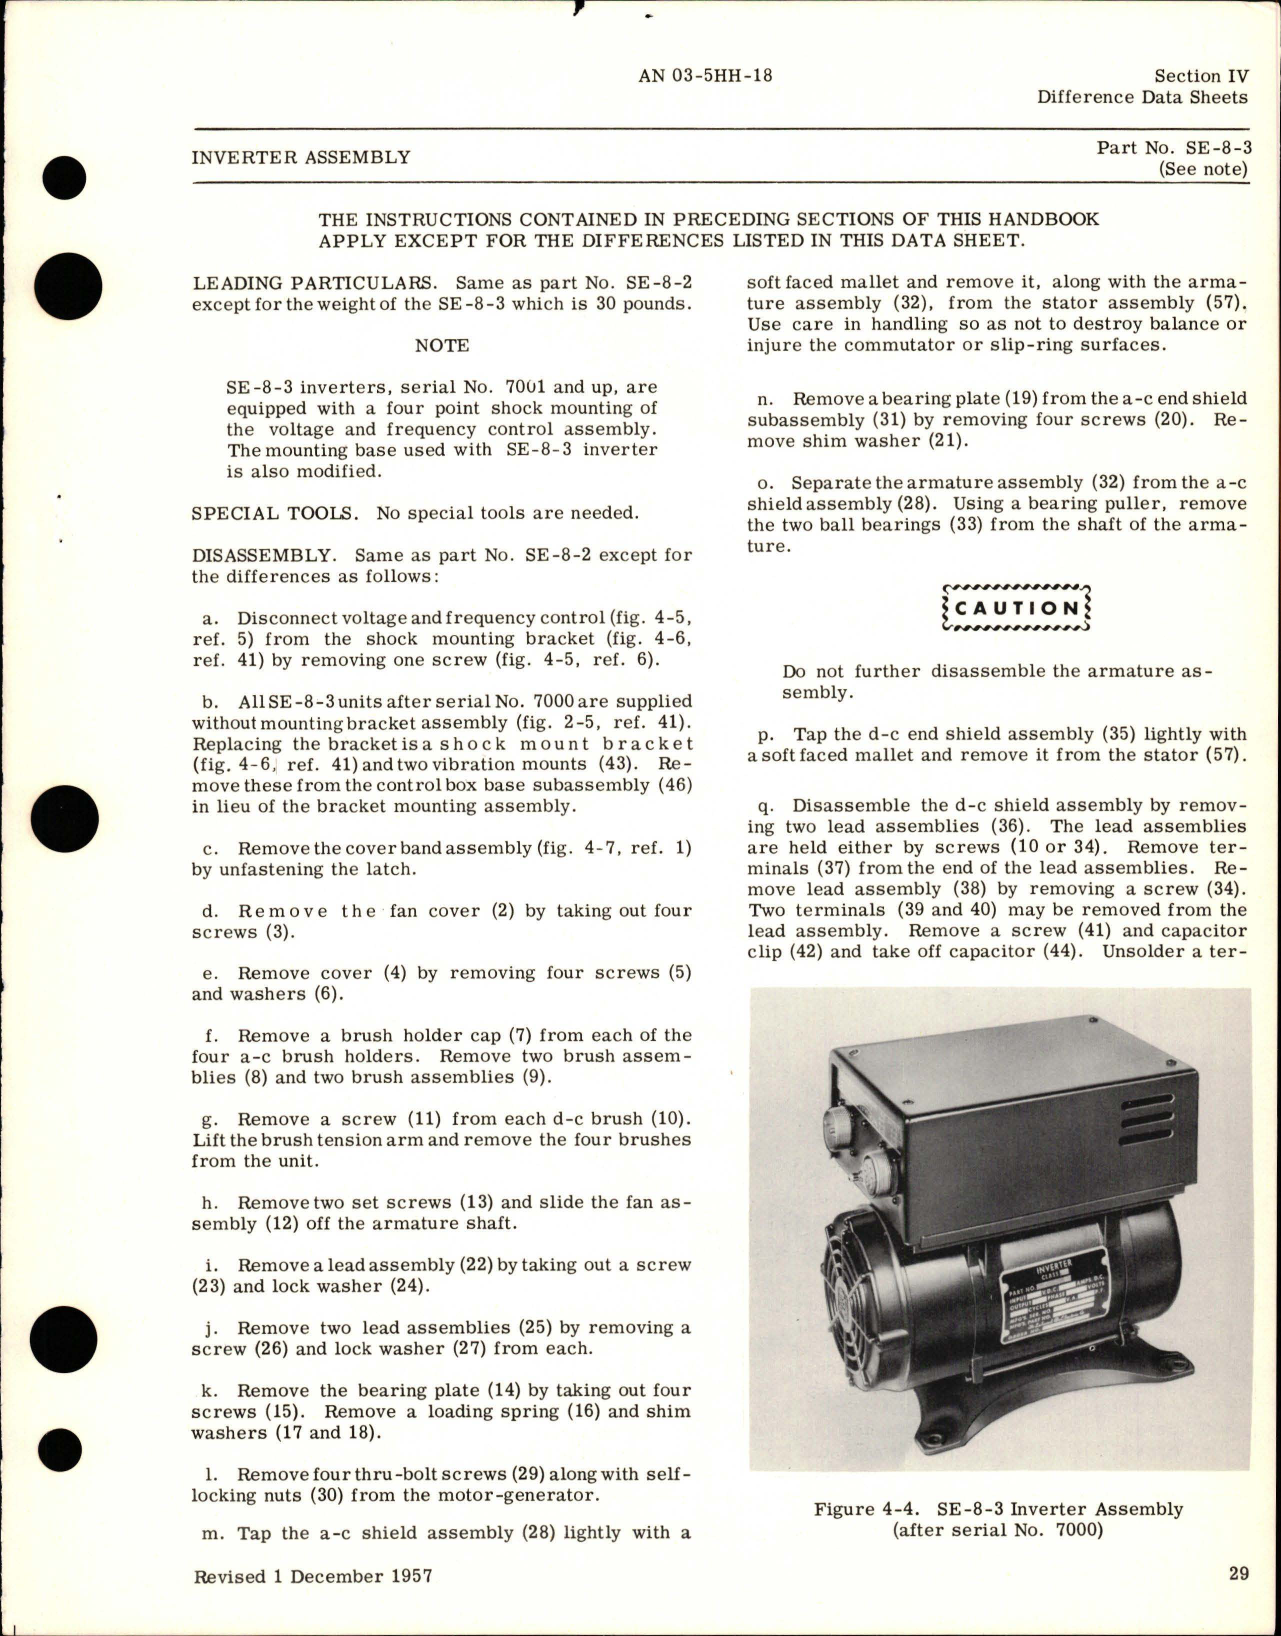 Sample page 5 from AirCorps Library document: Overhaul Instructions for Inverter - Parts SE-8-2 and SE-8-3